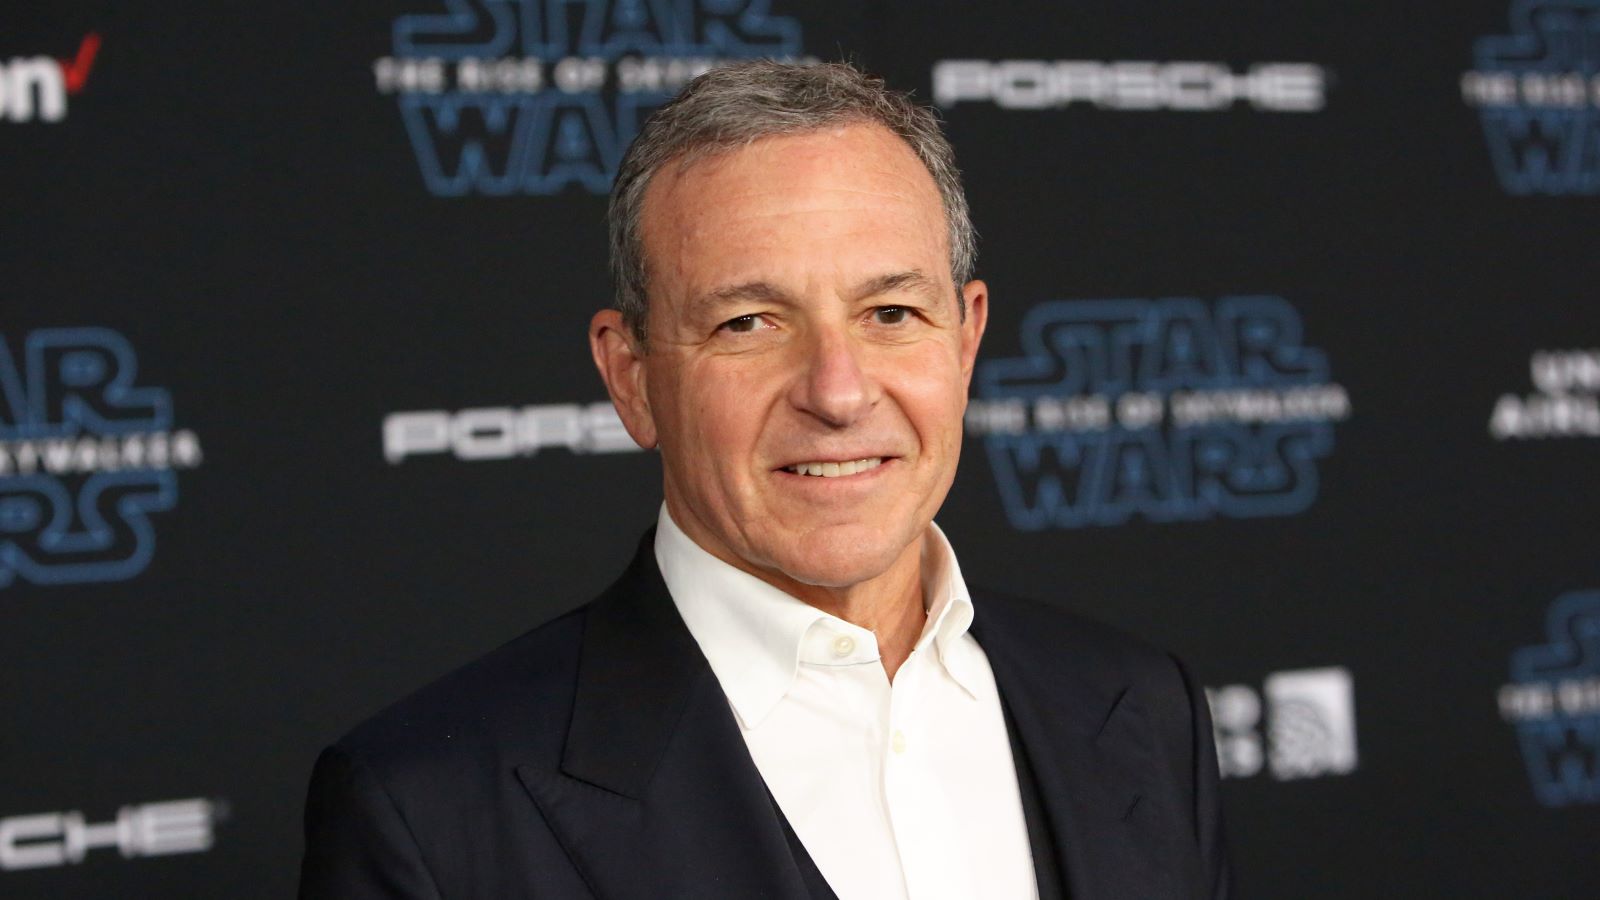 The Walt Disney Company Chairman and CEO Bob Iger arrives for the World Premiere of "Star Wars: The Rise of Skywalker", the highly anticipated conclusion of the Skywalker saga on December 16, 2019 in Hollywood, California. (Photo by Jesse Grant/Getty Images for Disney)